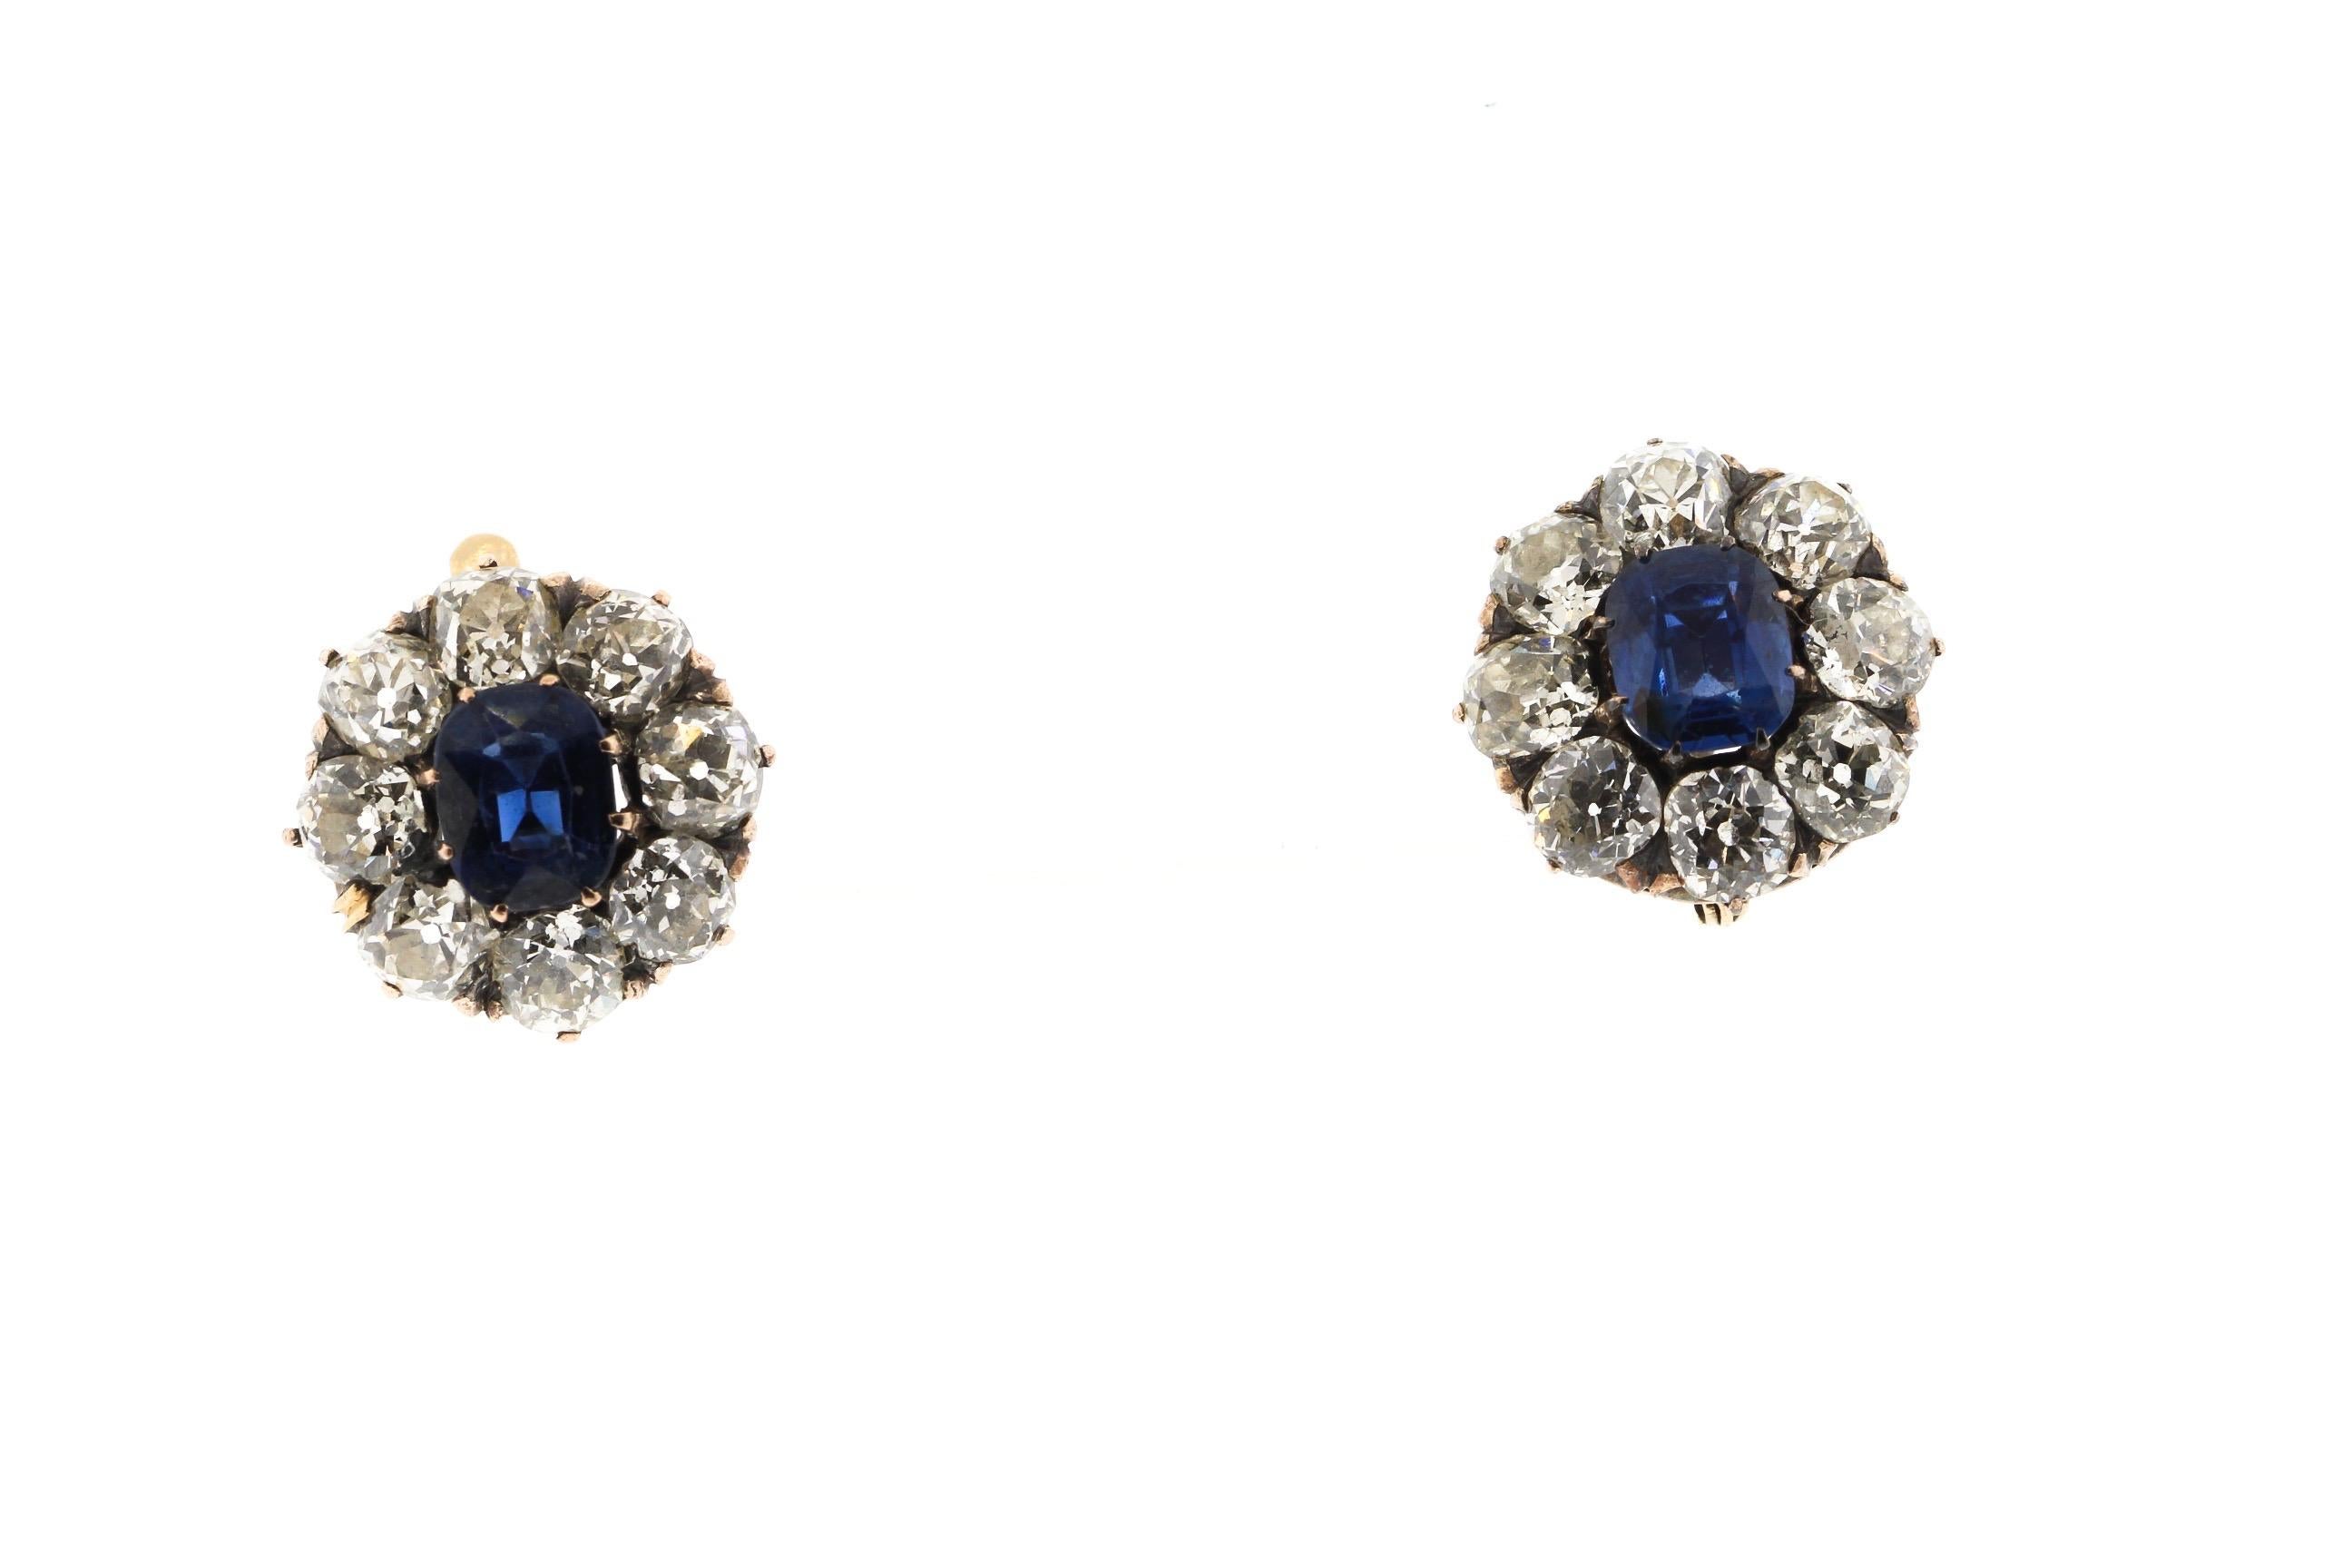 A pair of antique old mine diamond and sapphire cluster earring circa 1890. This is a wonderful and classic model of earring, and very easy to wear. The earrings center on a bright blue sapphire each weighing about a carat. They have been tested by